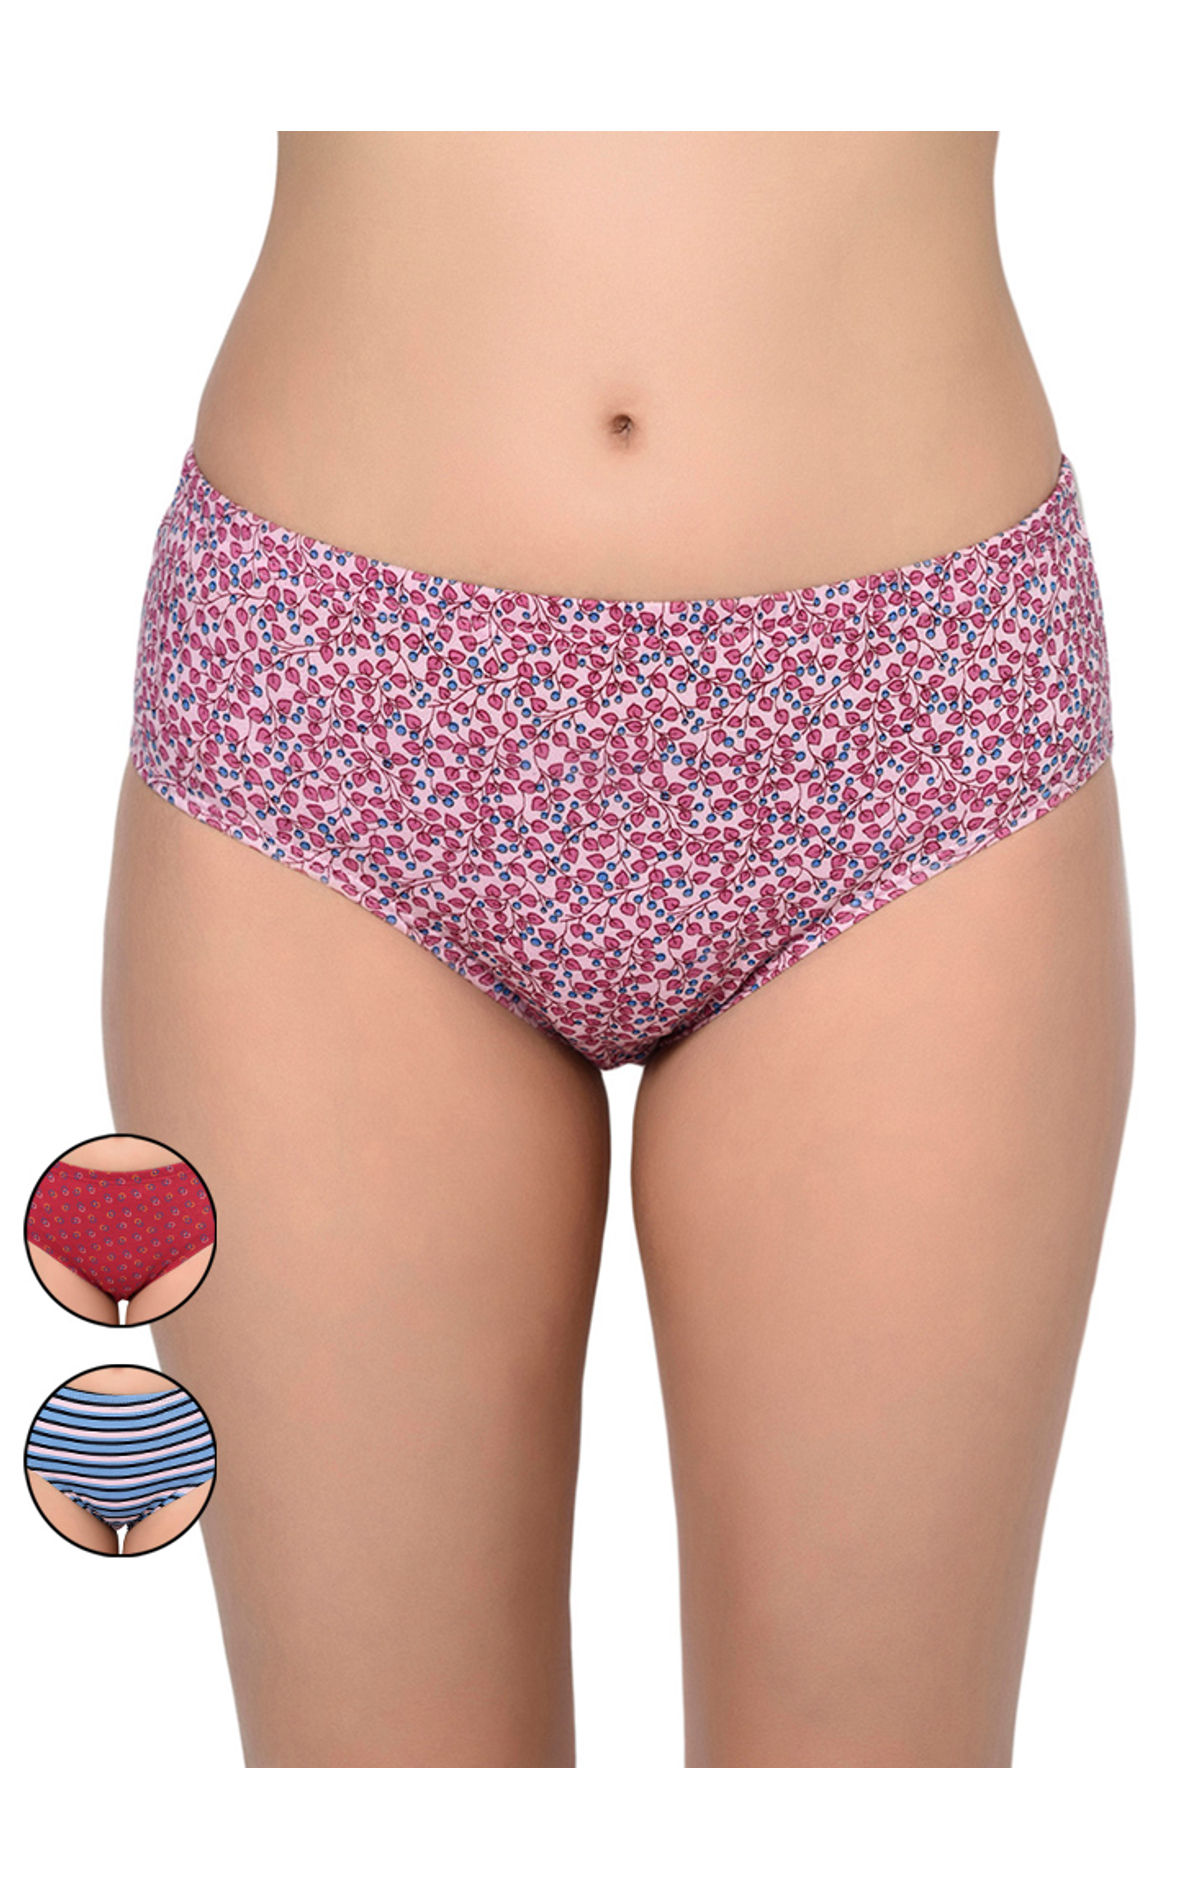 Bodycare Pack Of 3 Printed Panty In Assorted Print-810-3pcs, 810-3pcs